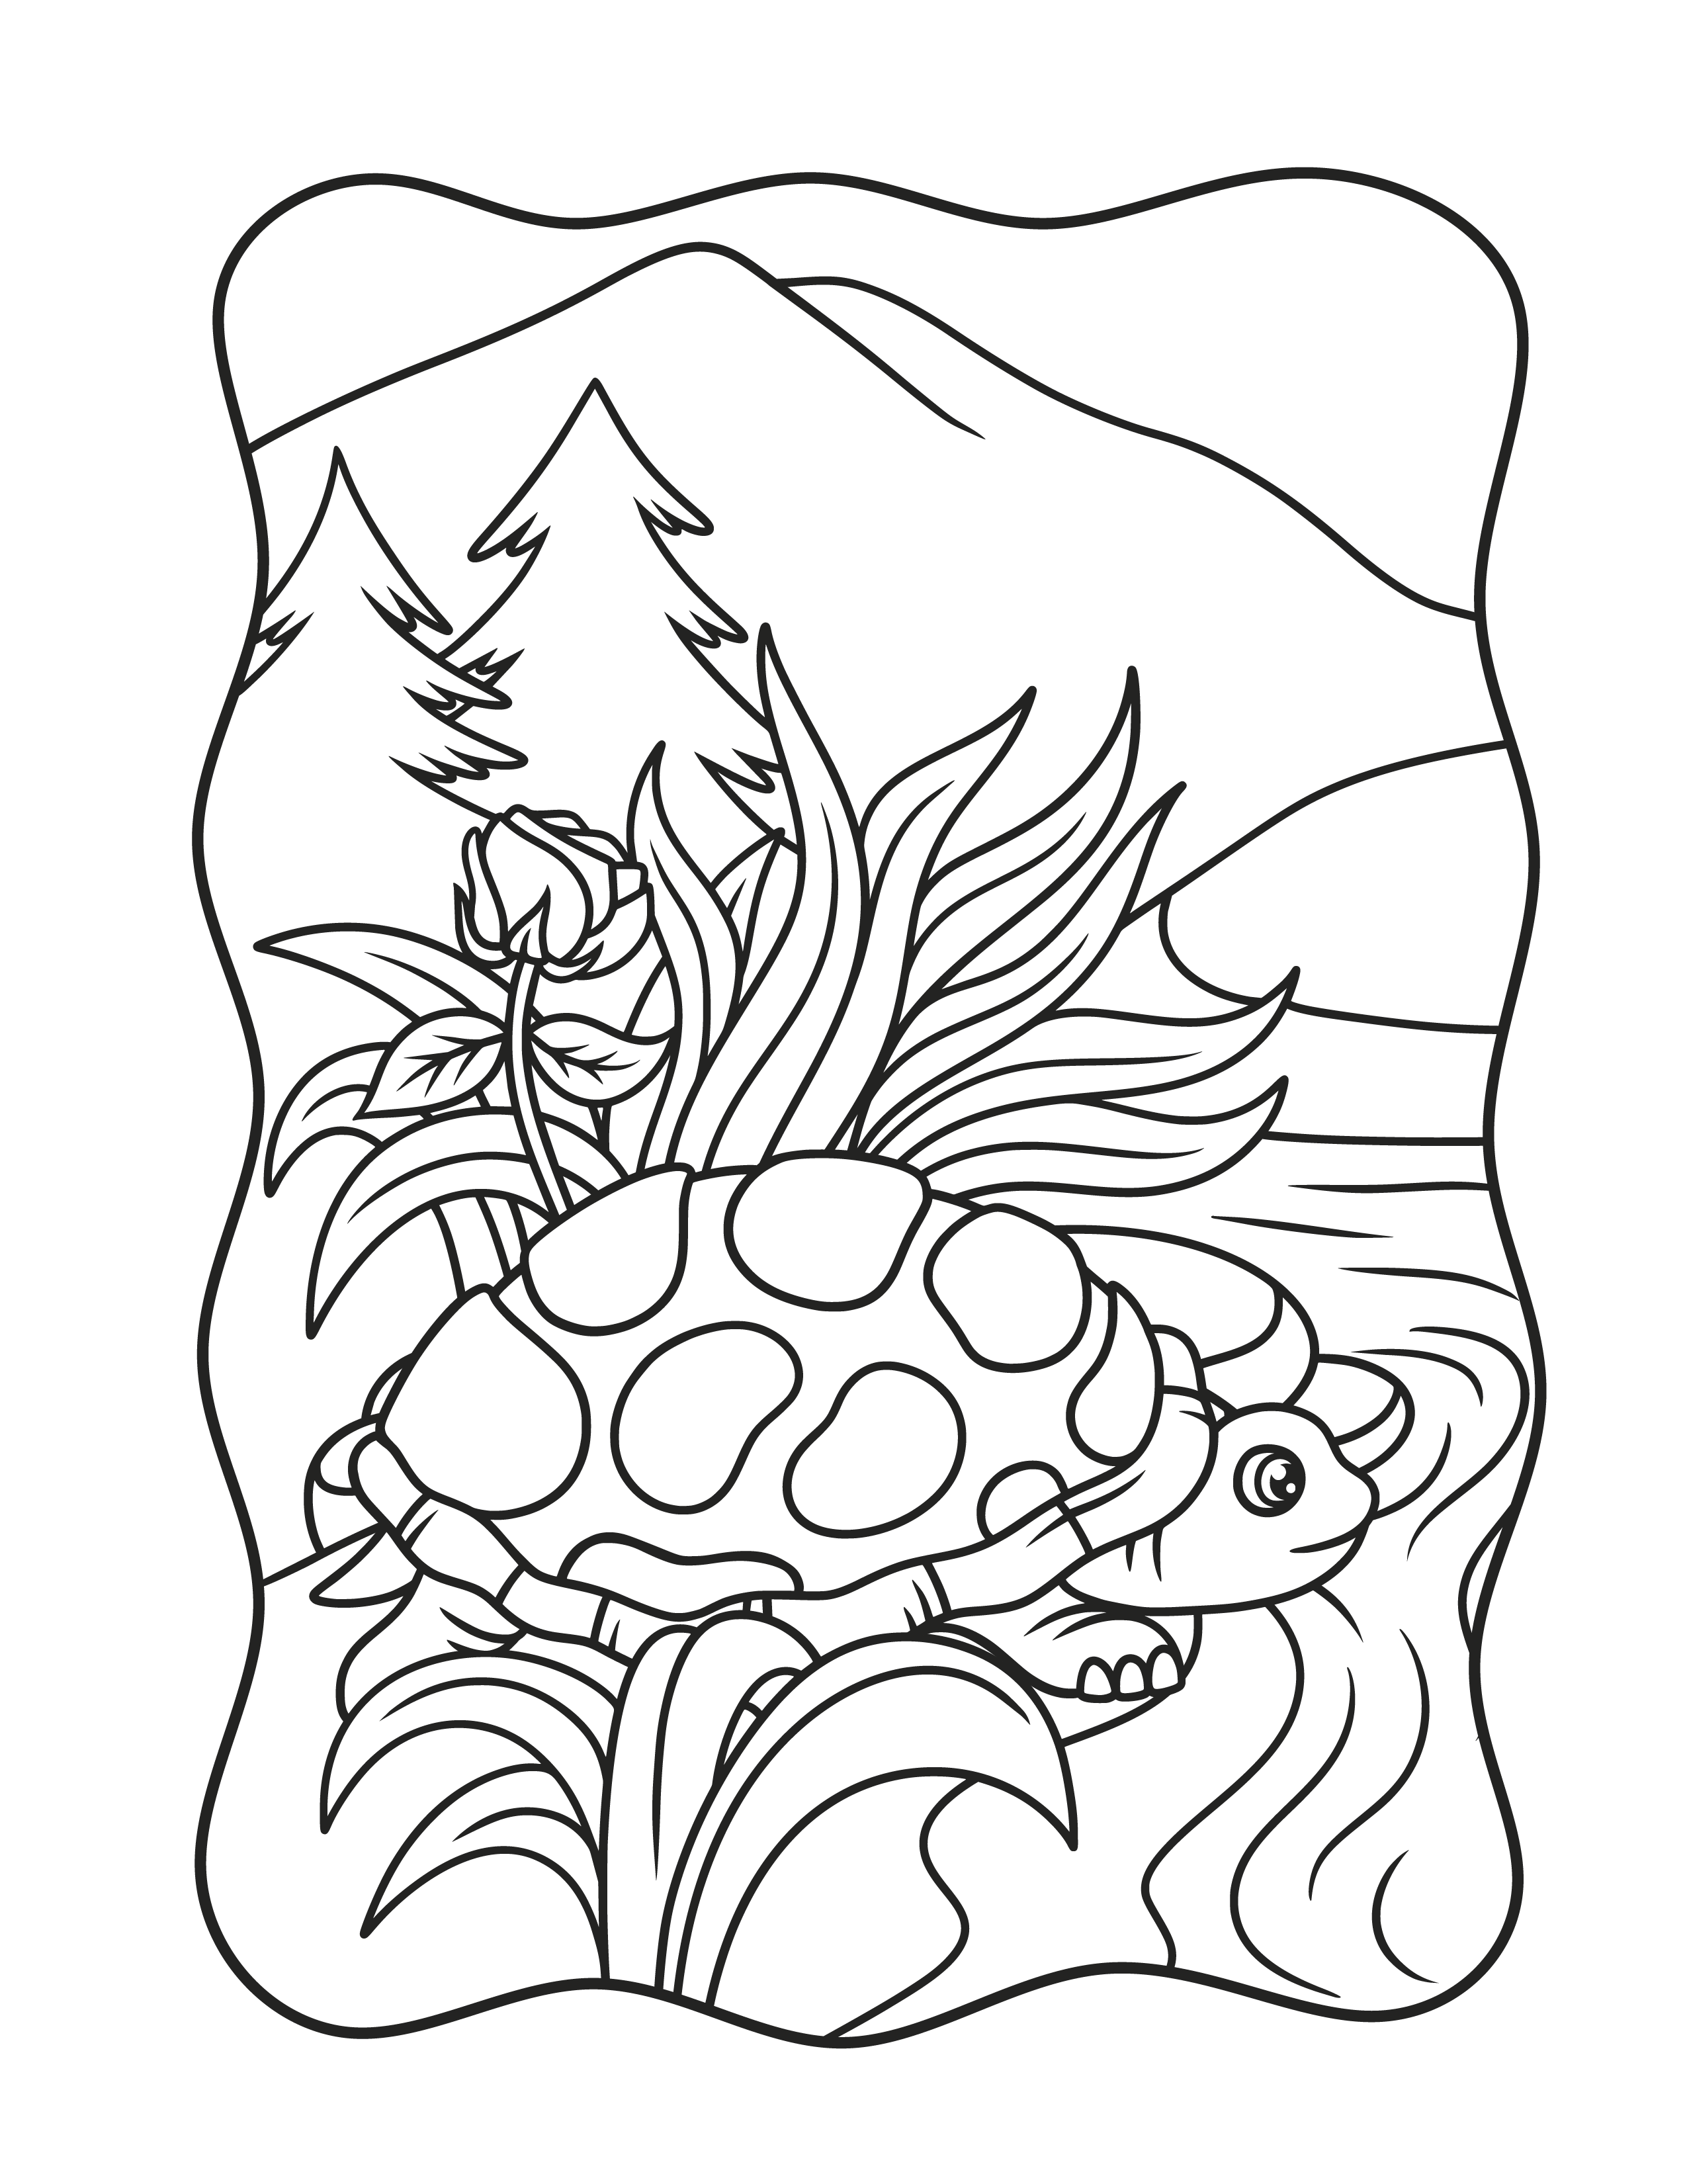 coloring page of turtle in nature setting